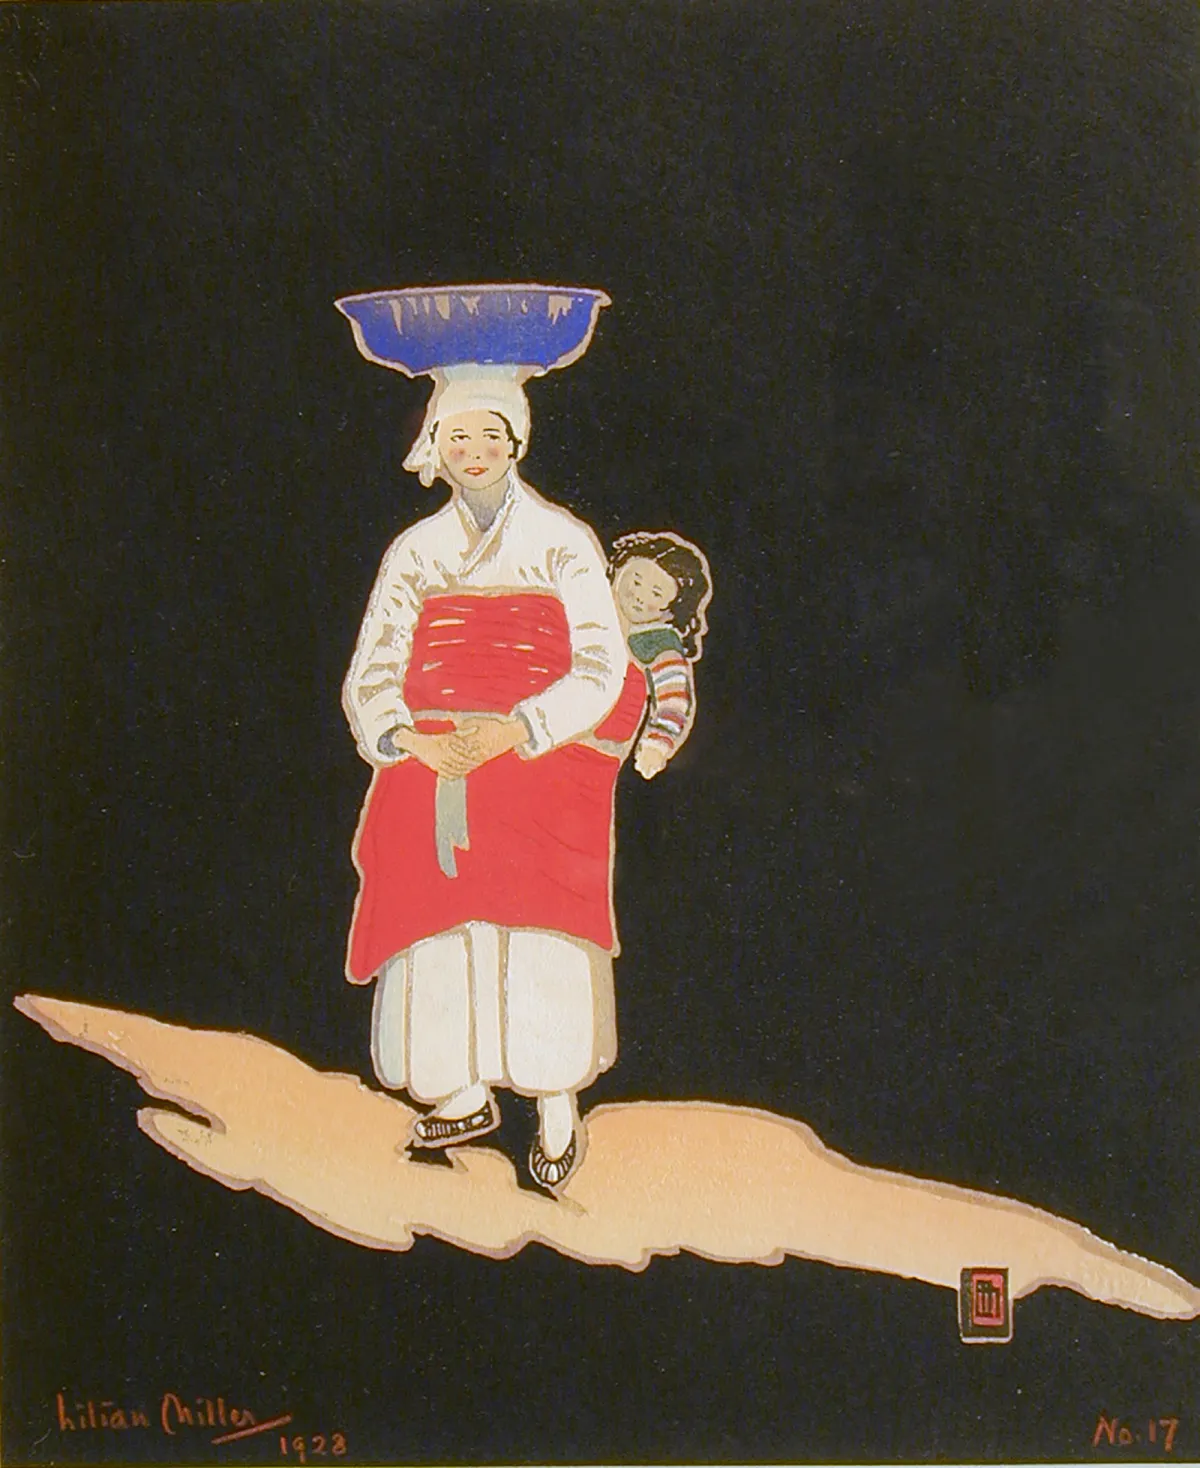 A woodblock print from 1928 titled 'Quaintness of Korea, no. 17' shows an illustration of a mother in traditional clothes carrying her baby on her back while balancing a blue wash basin on her head.